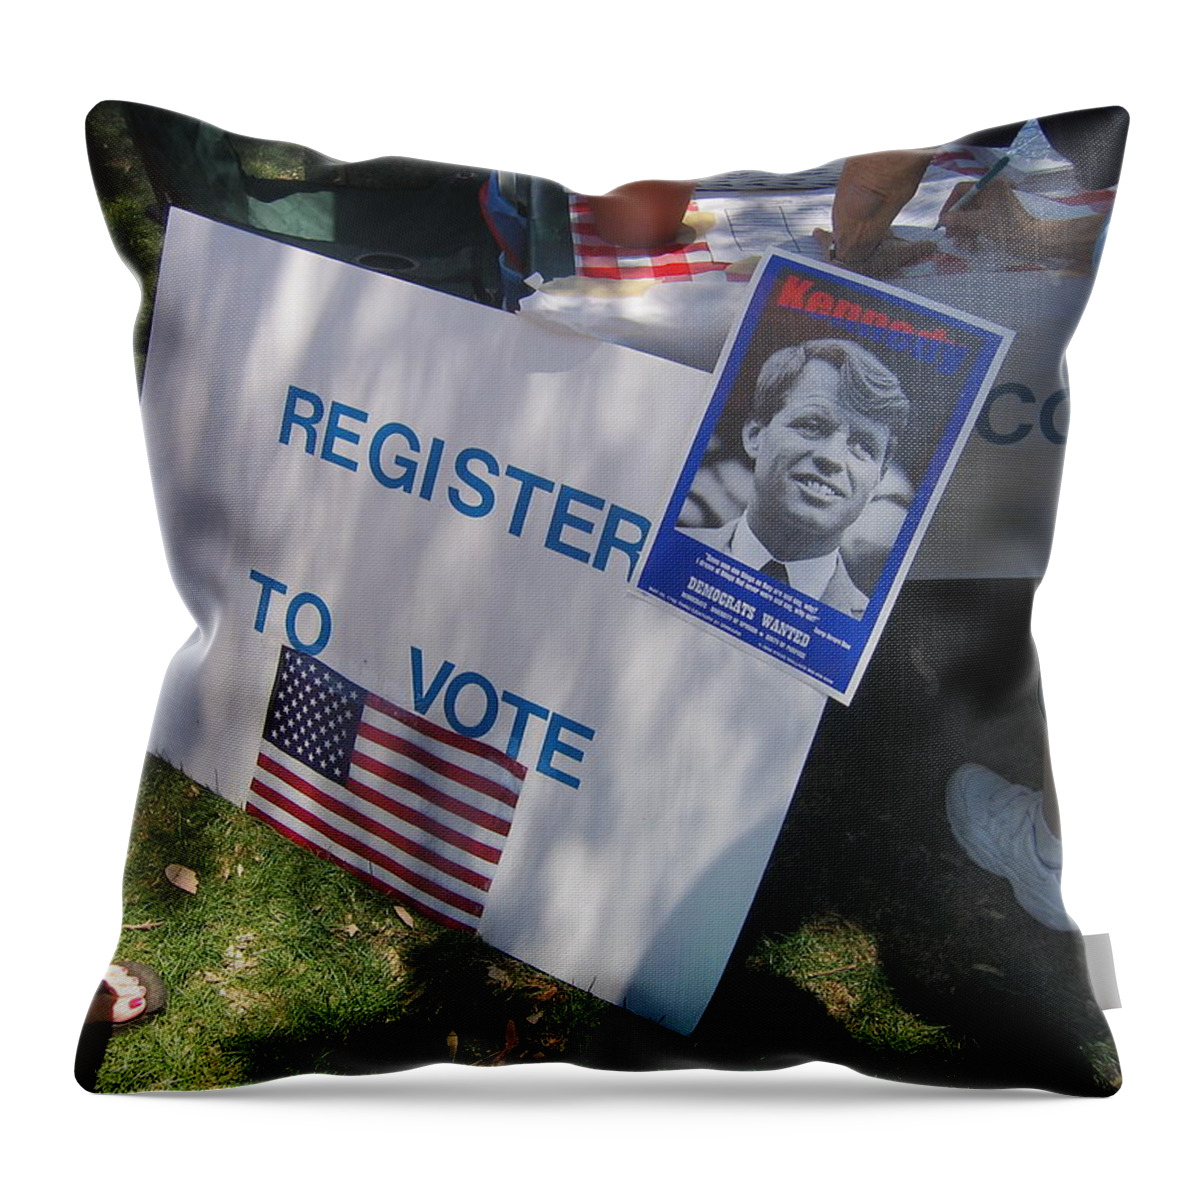 Register To Vote Bobby Kennedy Poster Sylver Short Hand Peart Park Casa Grande Arizona 2004 Throw Pillow featuring the photograph Register to vote Bobby Kennedy poster Sylver Short hand Peart Park Casa Grande Arizona 2004 by David Lee Guss